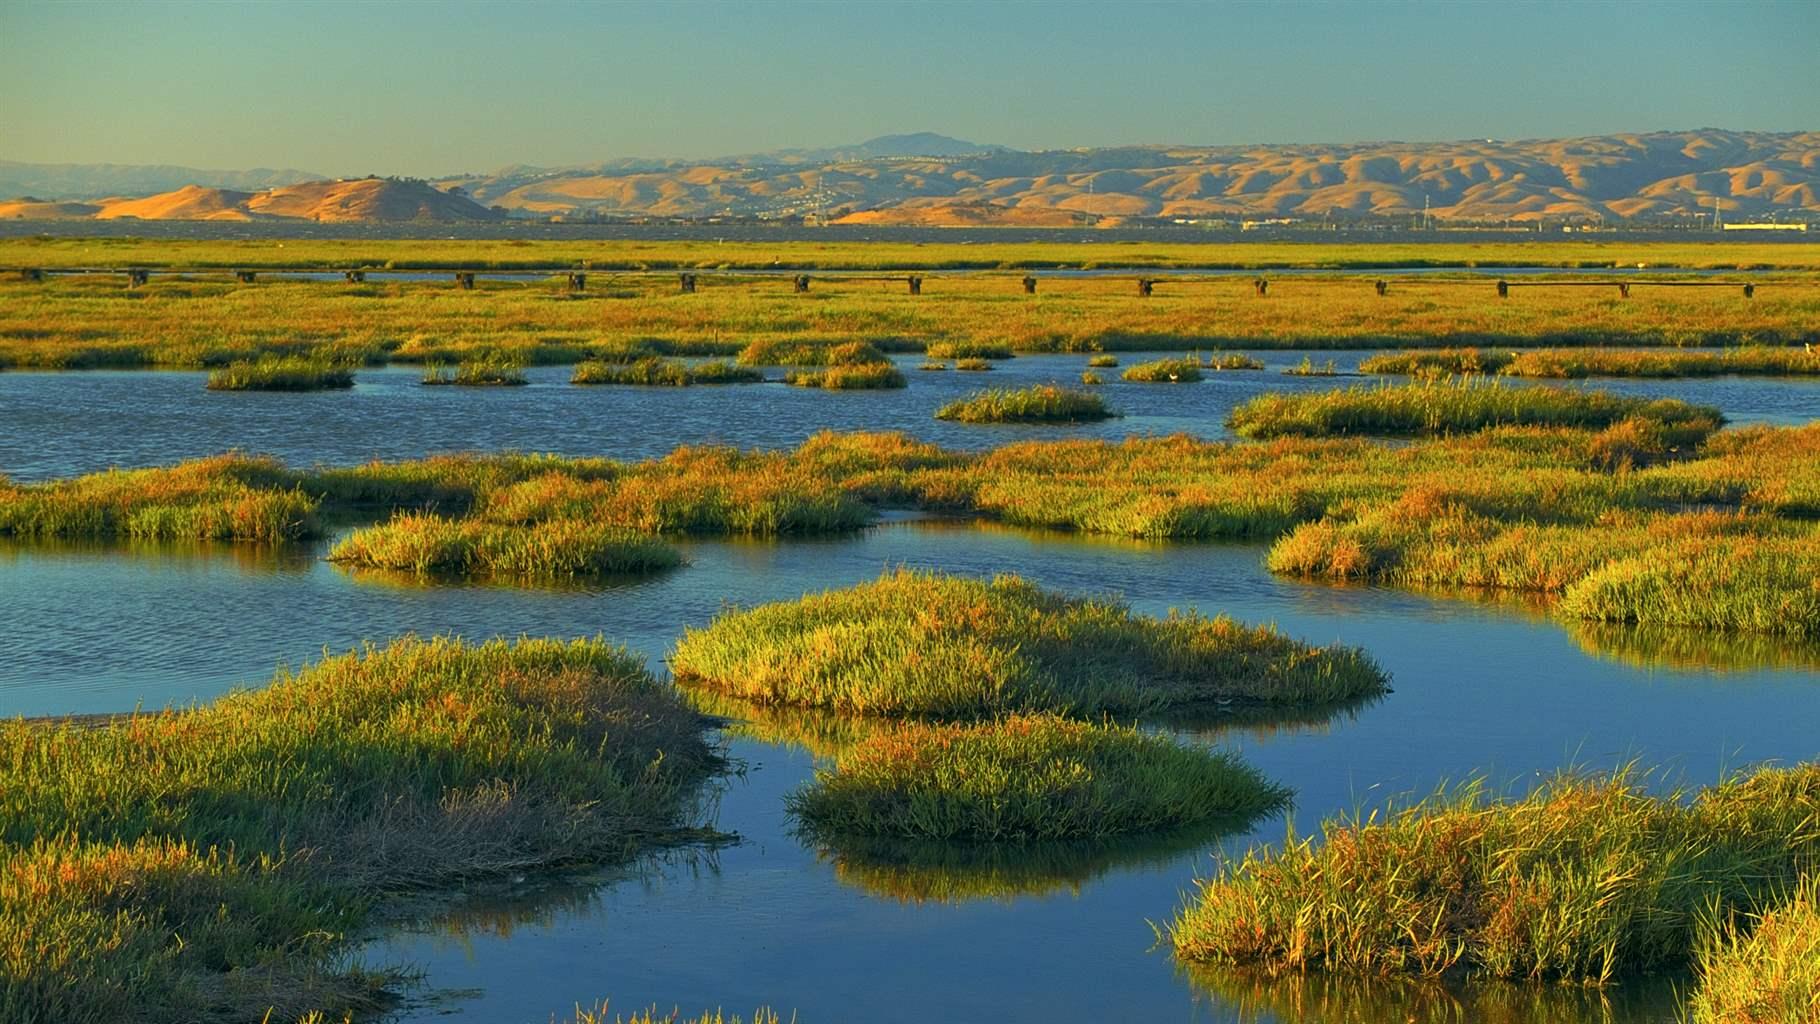 Moments before sunset, the lush green vegetation was illuminated gloriously by the last glimpse of soft warm sunlight, offering an impressively beautiful view of the coastal marshland at Bayland Nature Preserve in San Francisco Bay, Palo Alto, California.